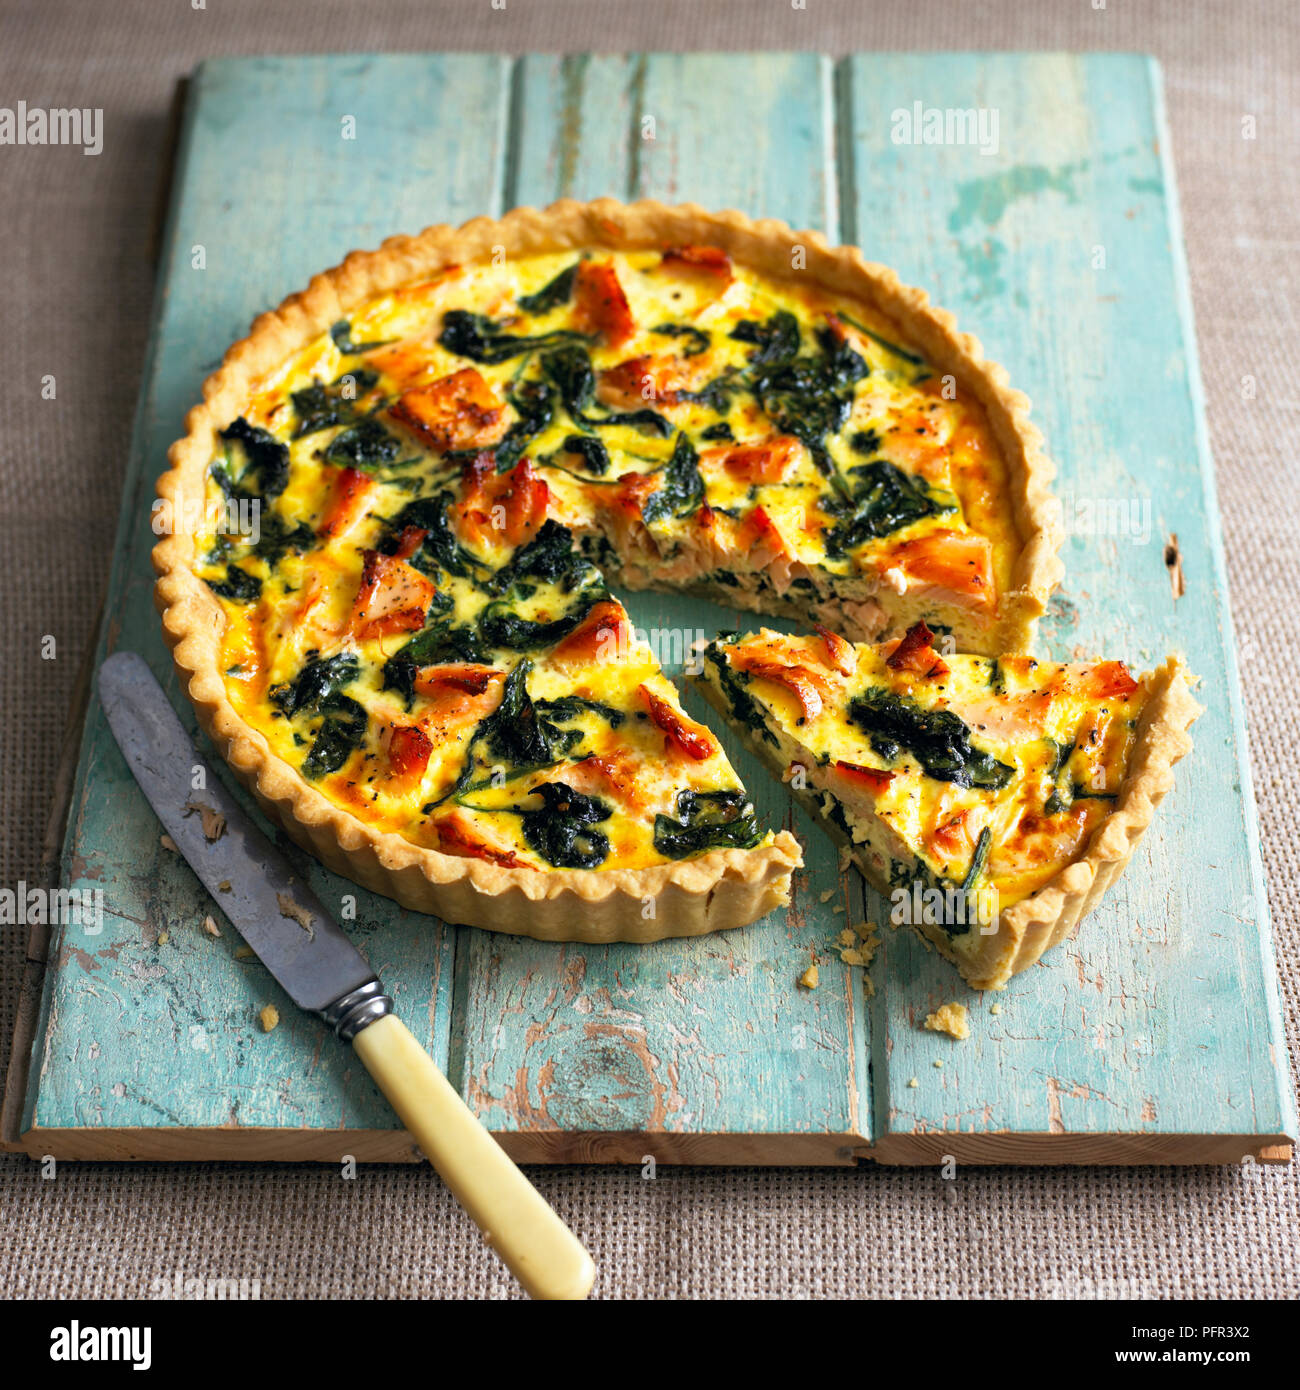 Salmon and spinach quiche with single slice cut away from the rest Stock Photo